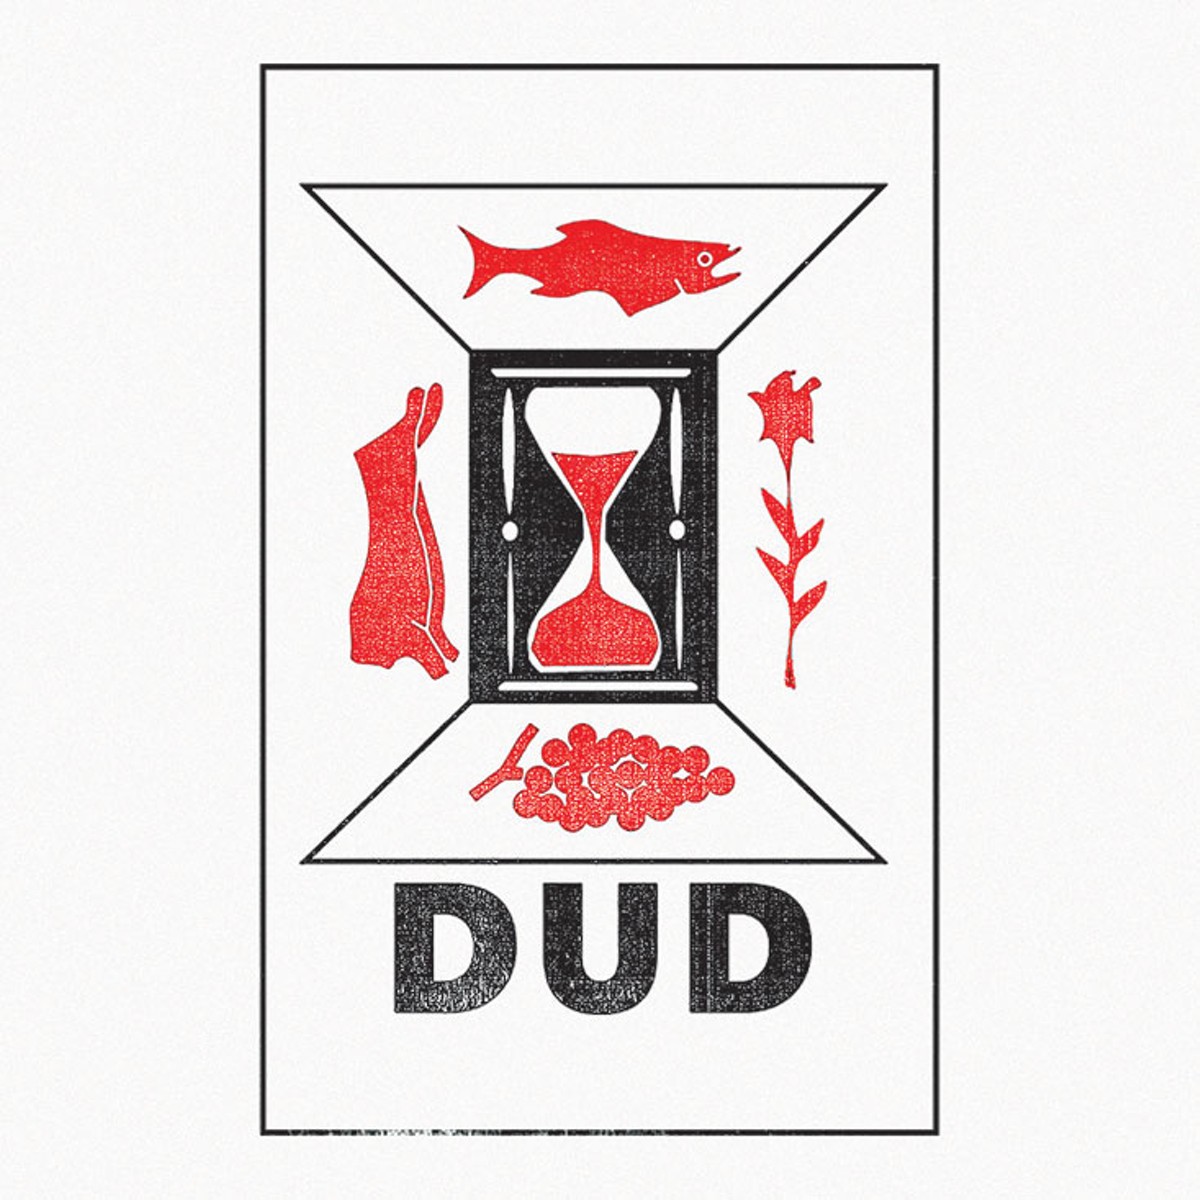 Dud, a new  fuzzed-out solo project from Scuzz Master's Danny O&#146;Connell